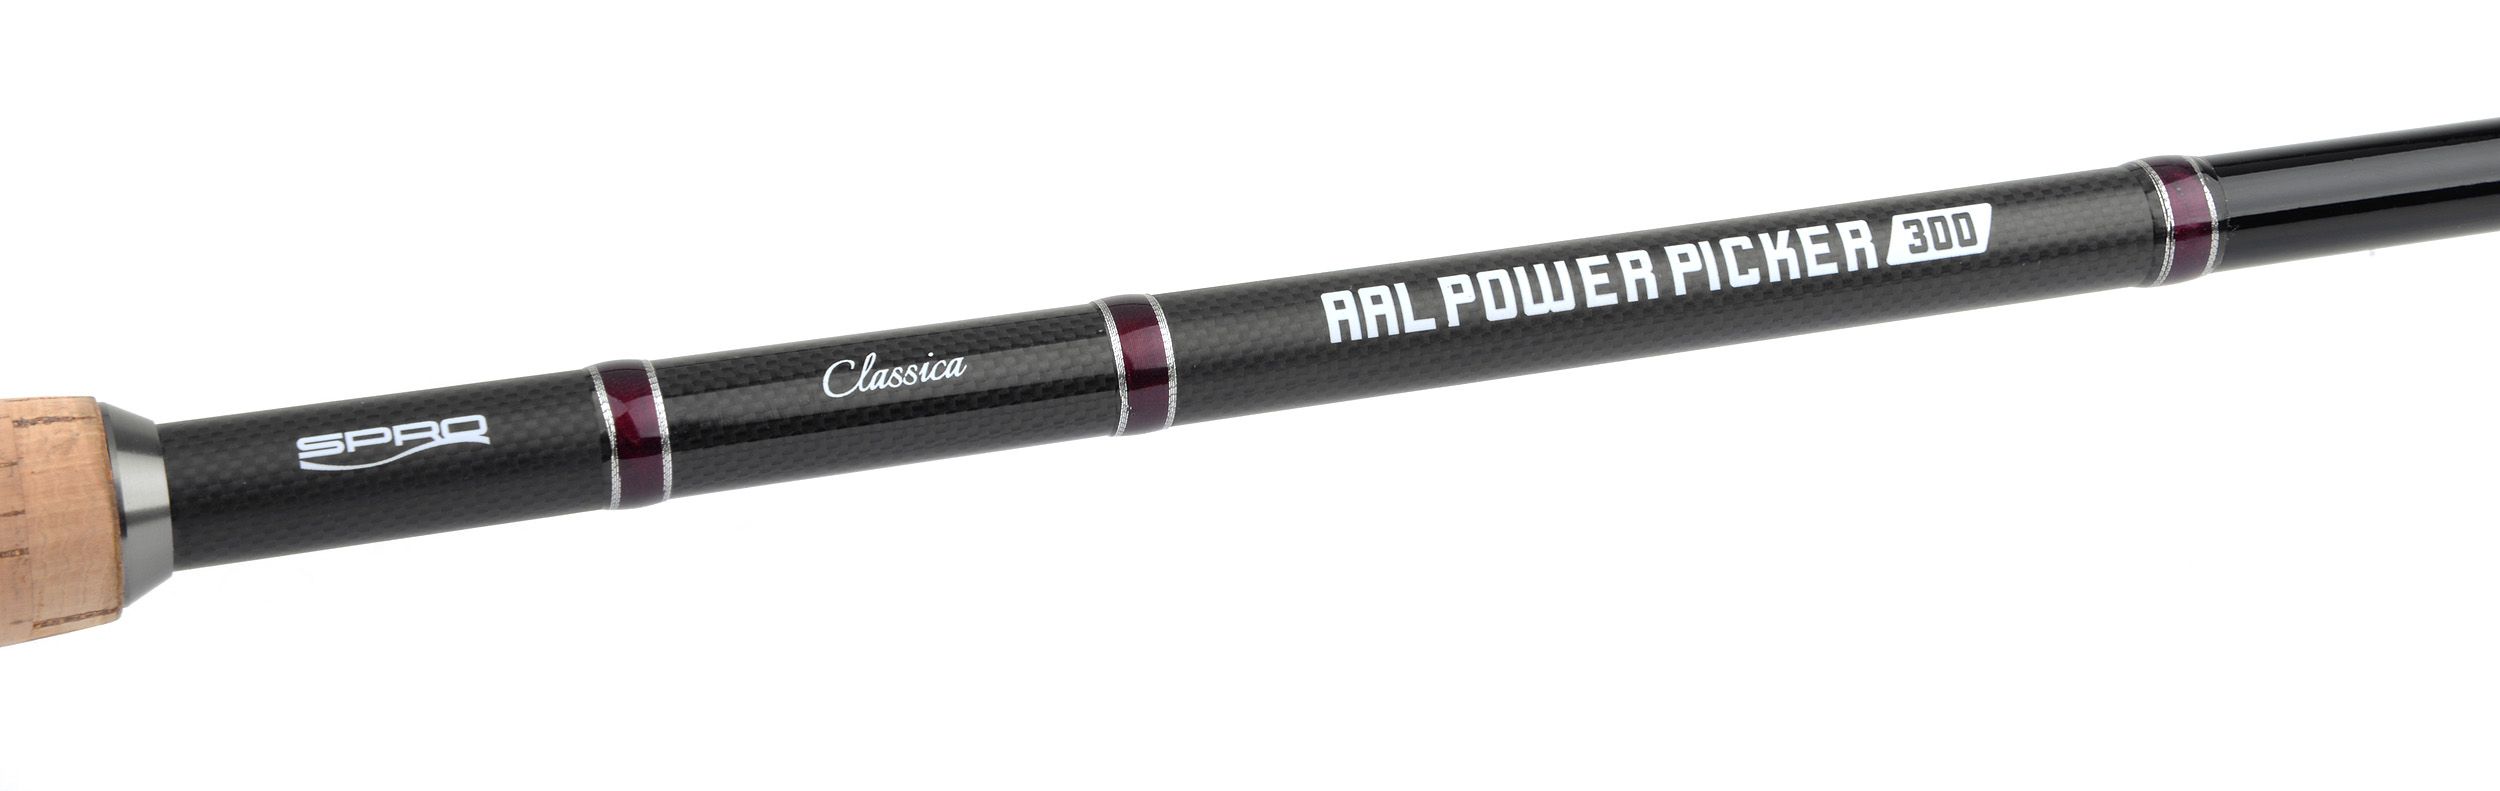 Spro Classica Aal Power Picker Rod (200g)